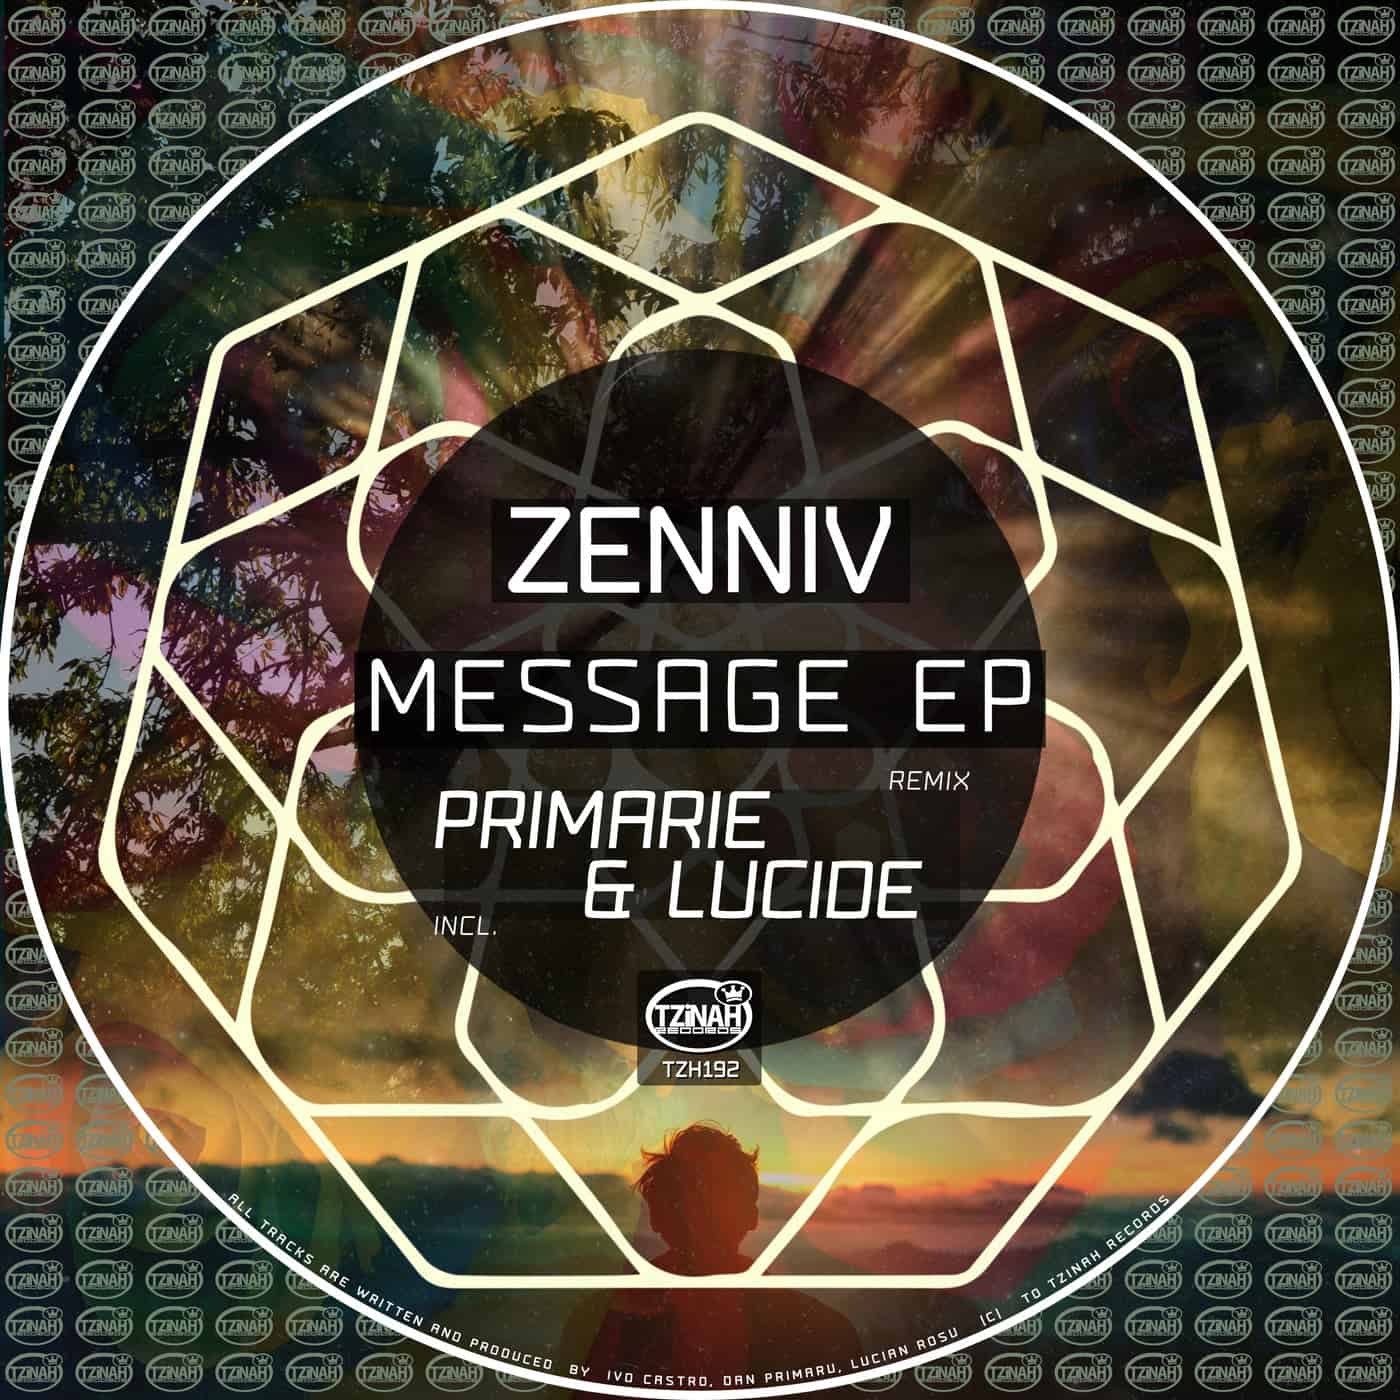 image cover: Message EP by Zenniv on Tzinah Records